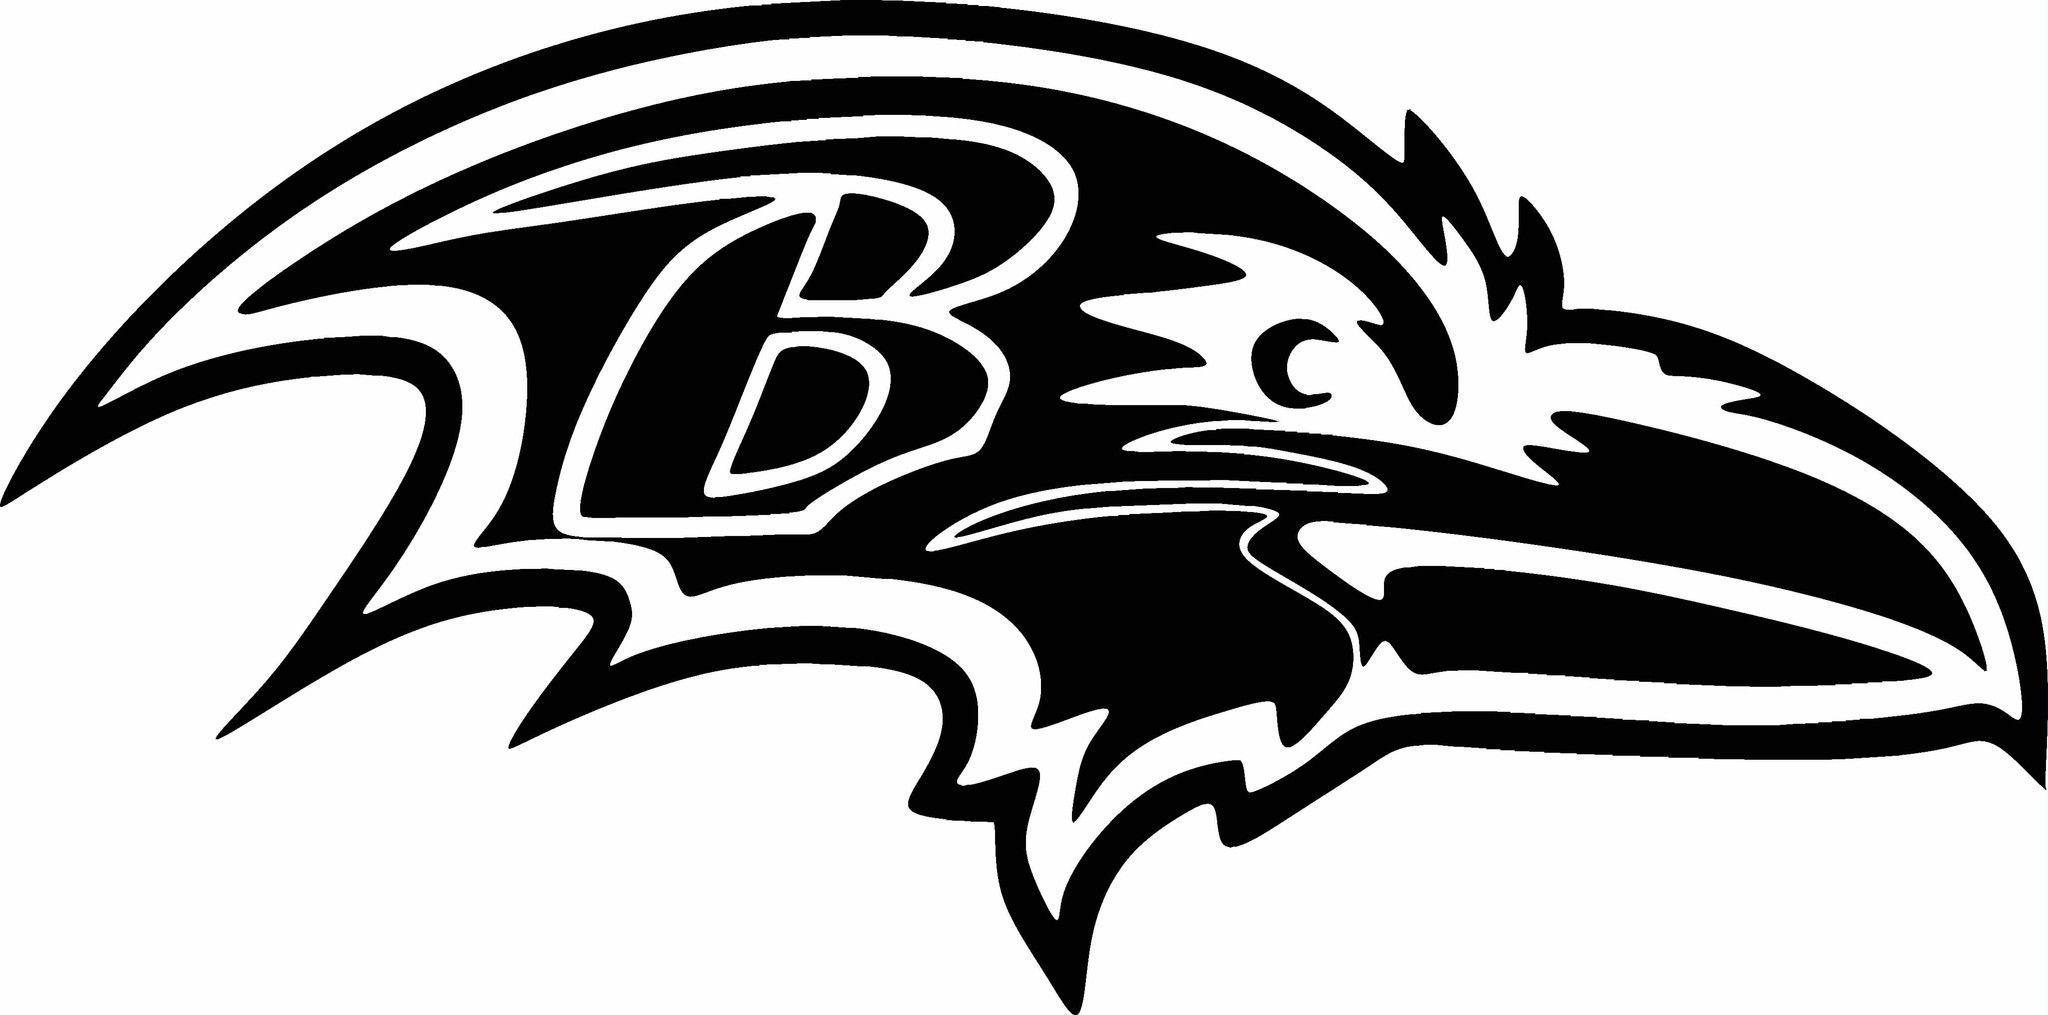 Black and White Ravens Logo - Baltimore Ravens LOGO Vinyl Cut Out Decal - Choose your Color and ...